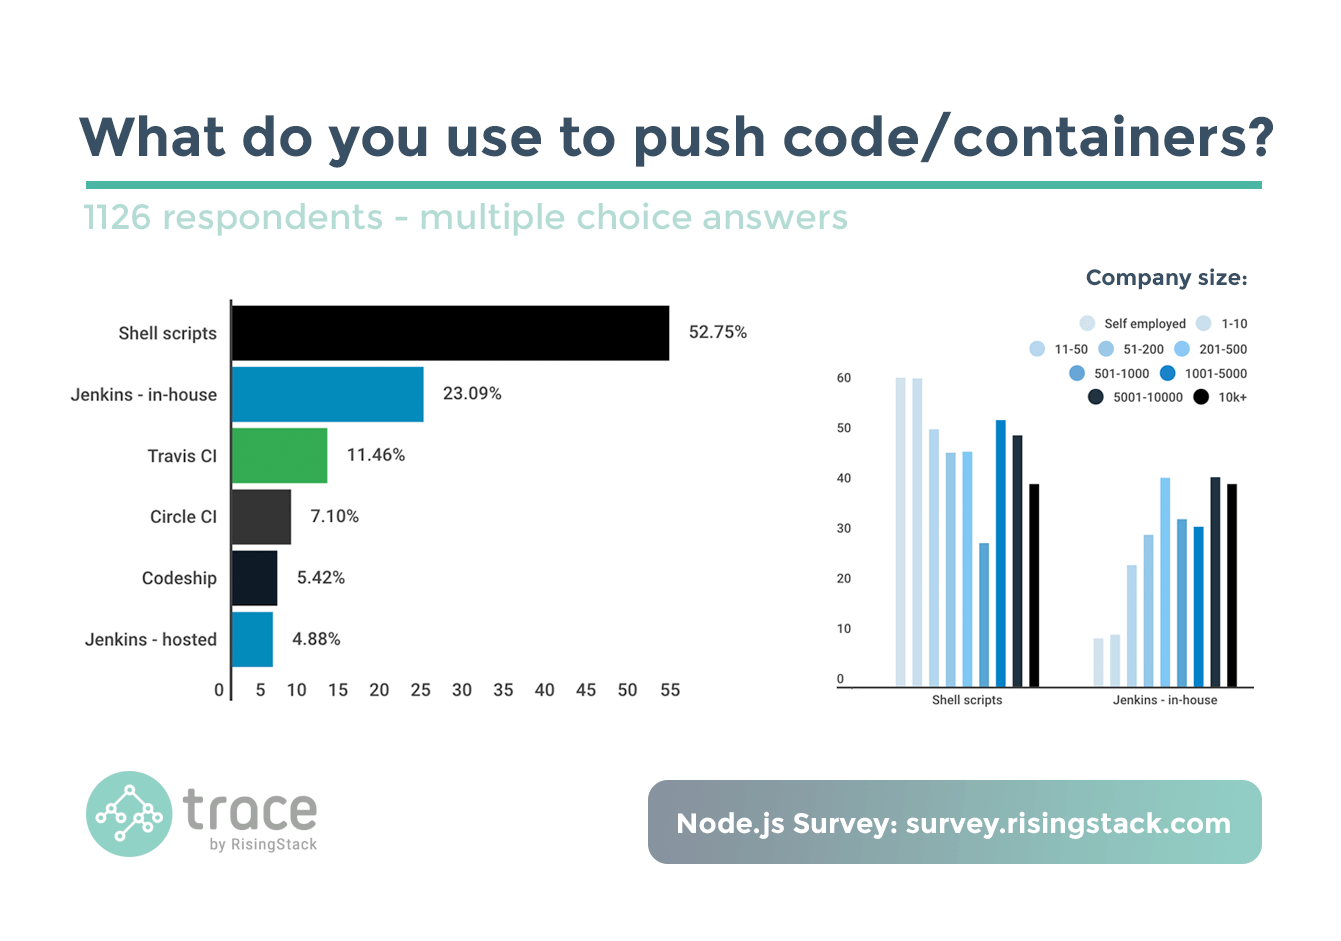 Node.js Survey - What do you use to push code or containers? Shell scripts win.